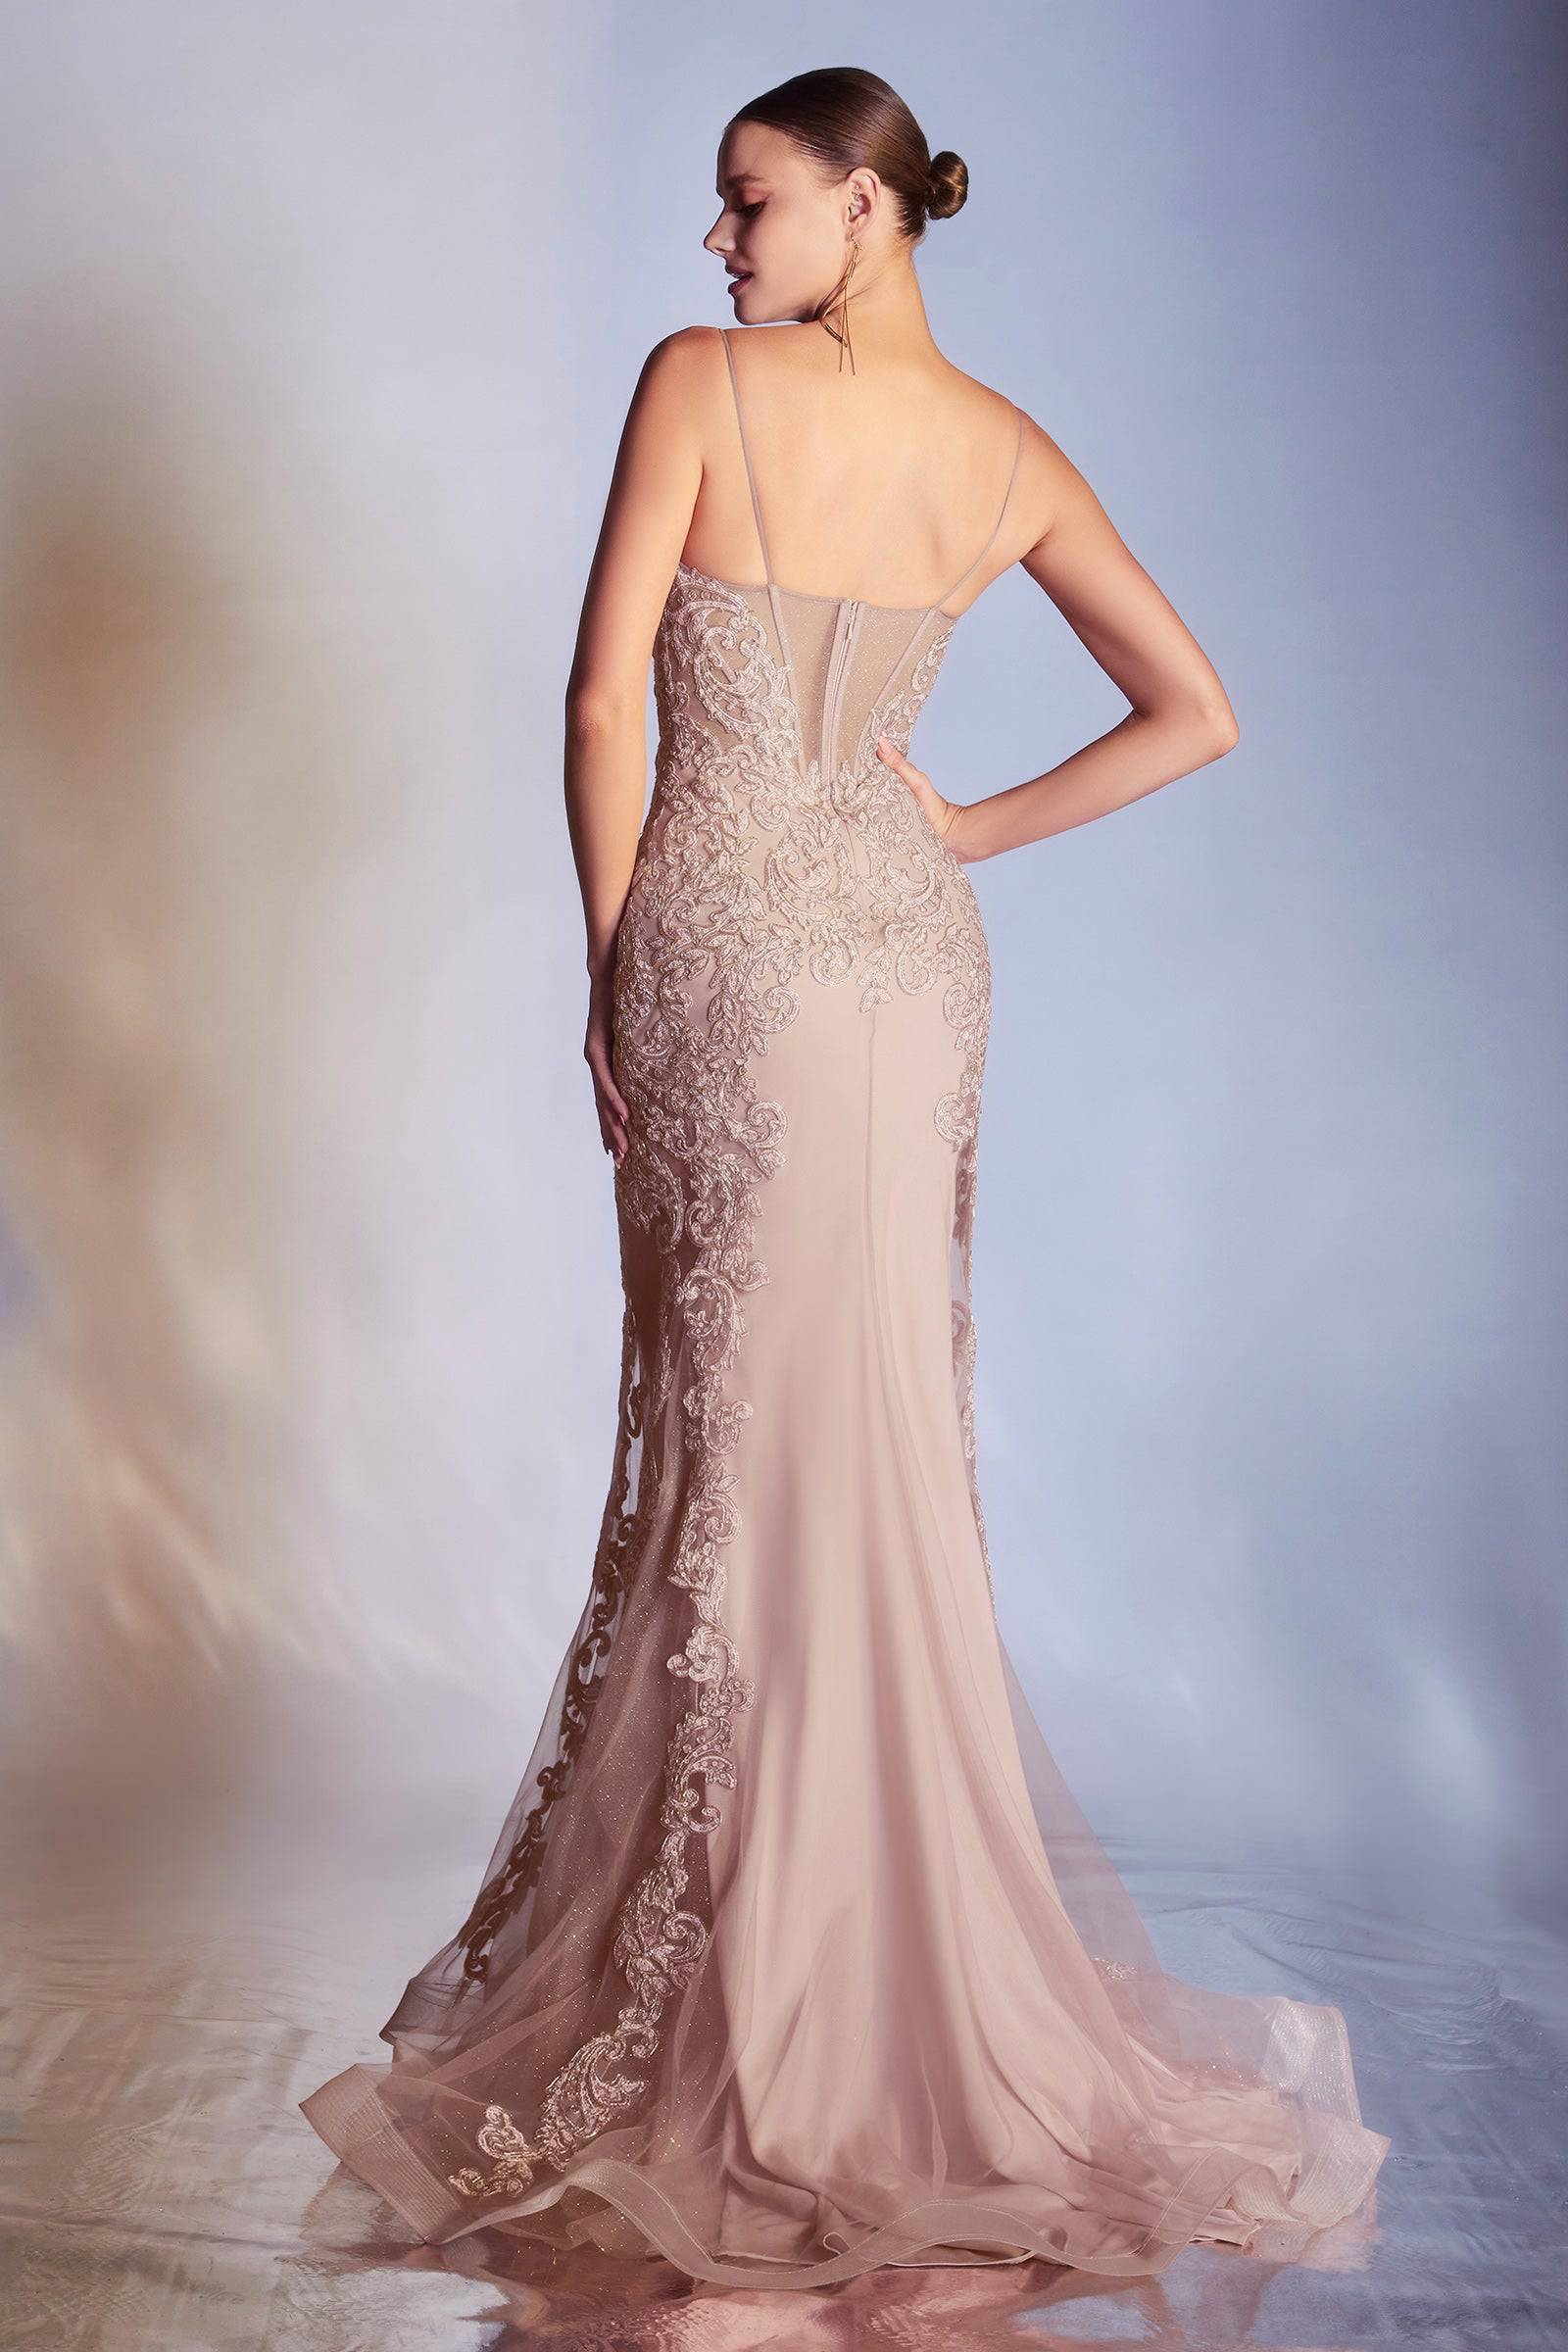 Elegant Mermaid Style Gown with Embroidered Bodice and Deep Neckline  Ladivine CD945